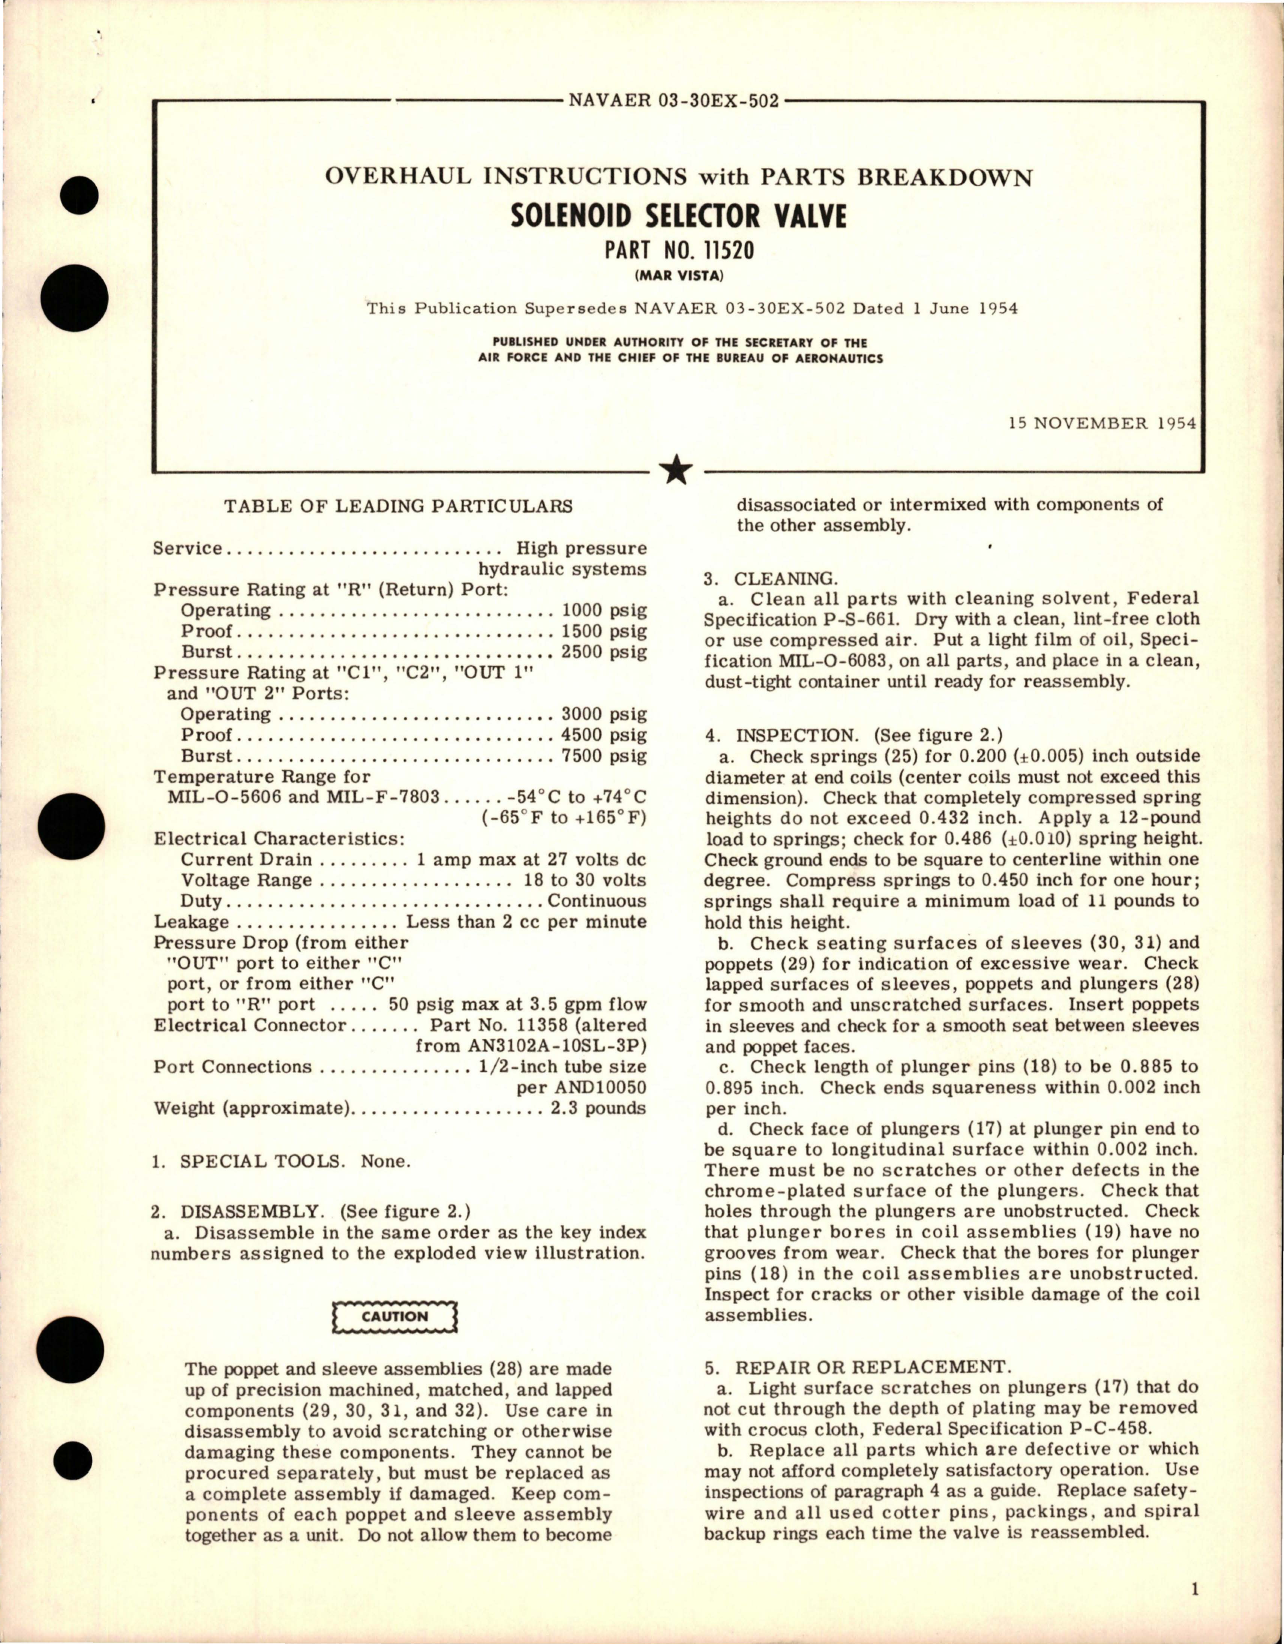 Sample page 1 from AirCorps Library document: Overhaul Instructions with Parts Breakdown for Solenoid Selector Valve - Part 11520